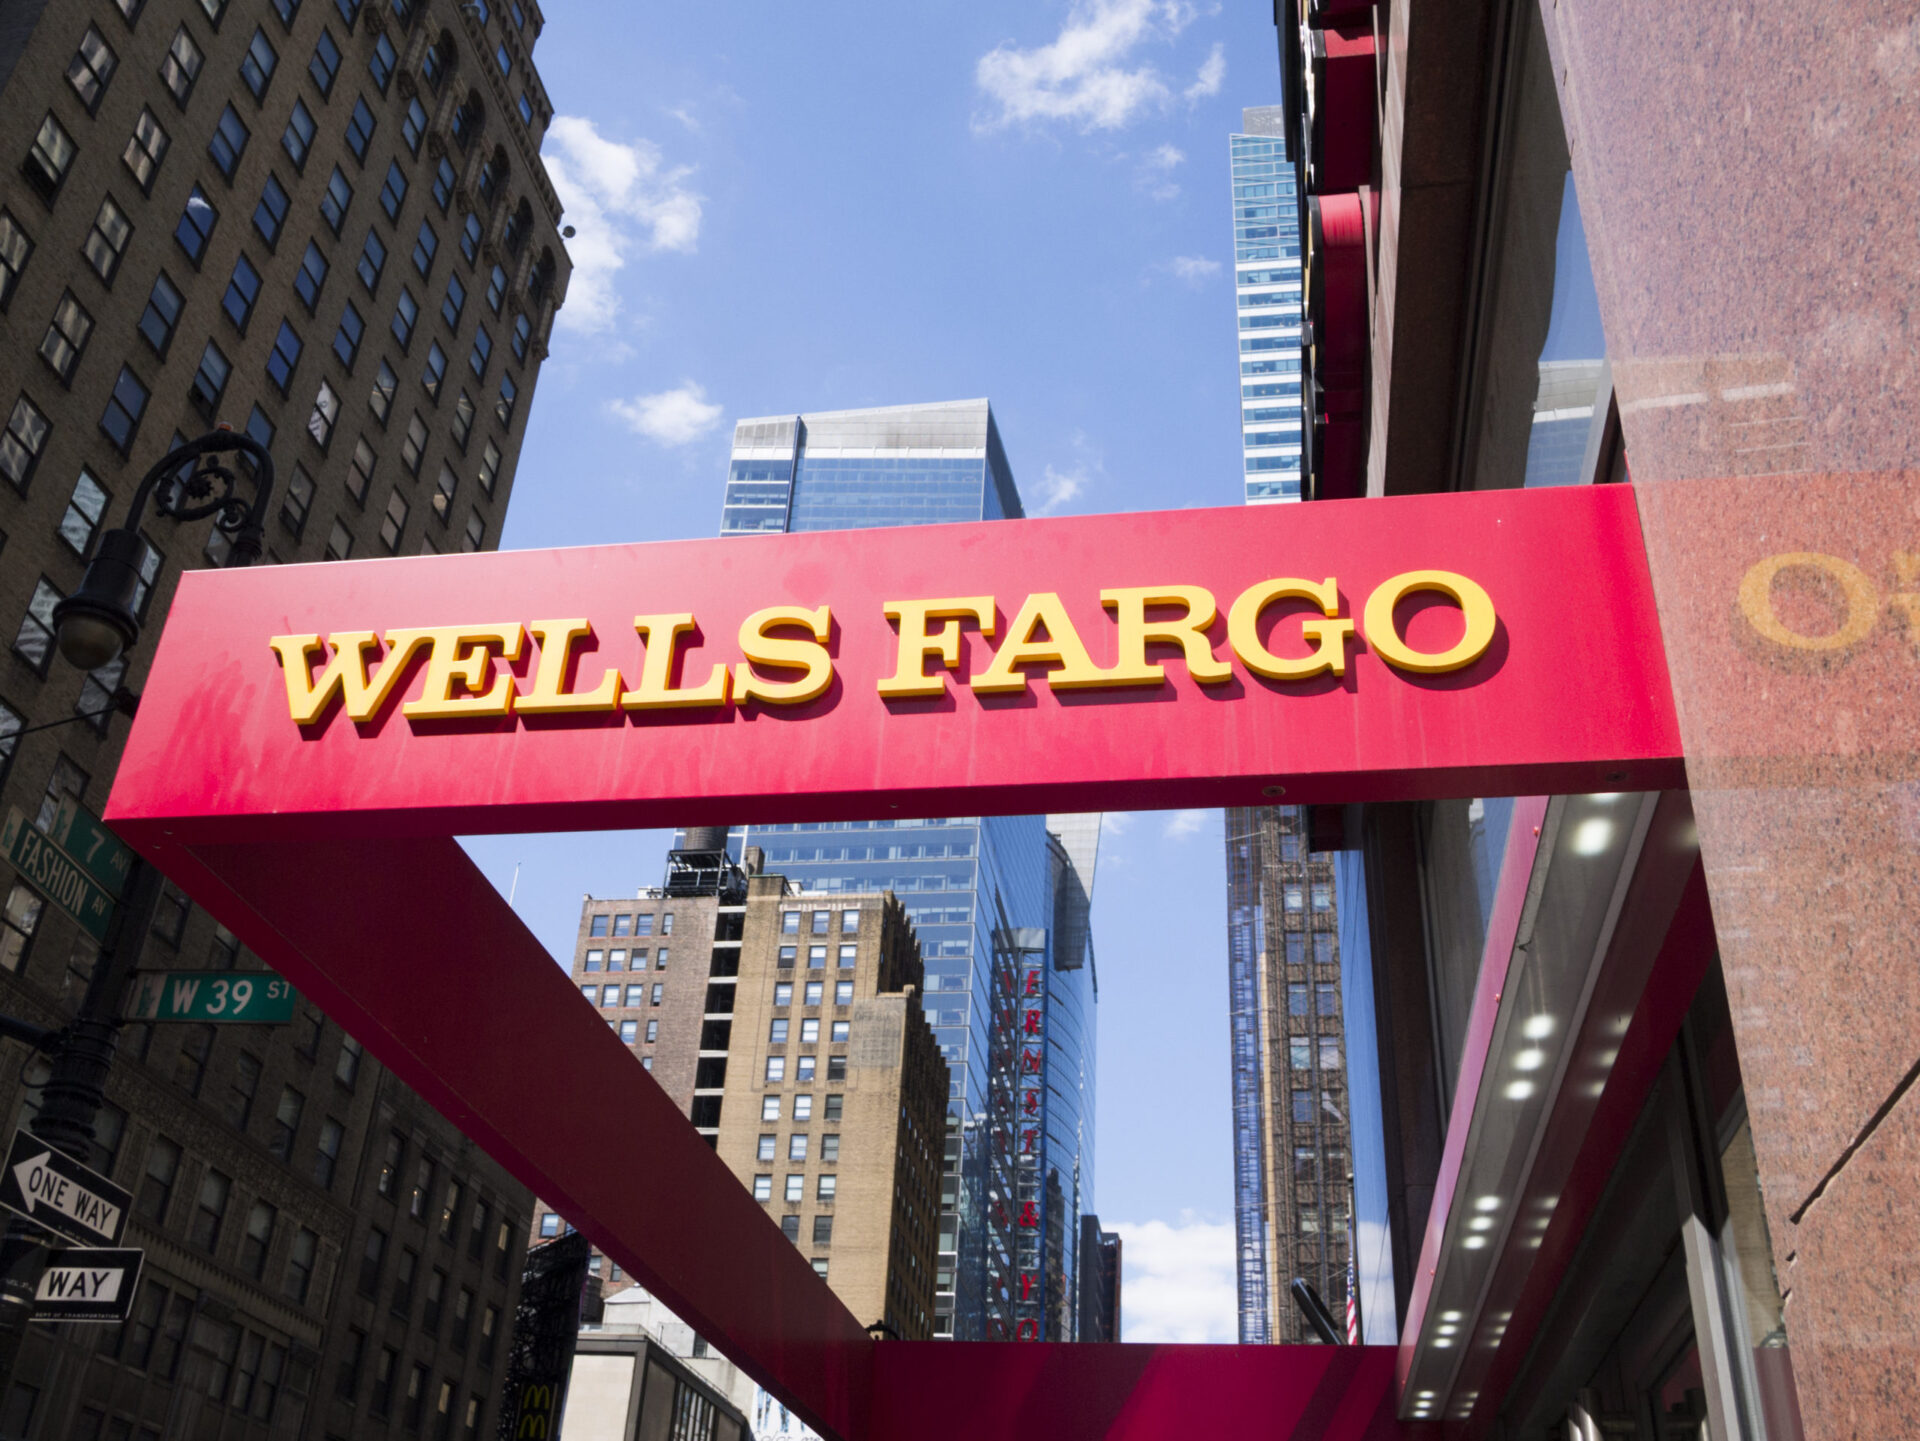 Morning Roundup (9/10/2021)- Equity Up in Q2, Wells Fargo Fined